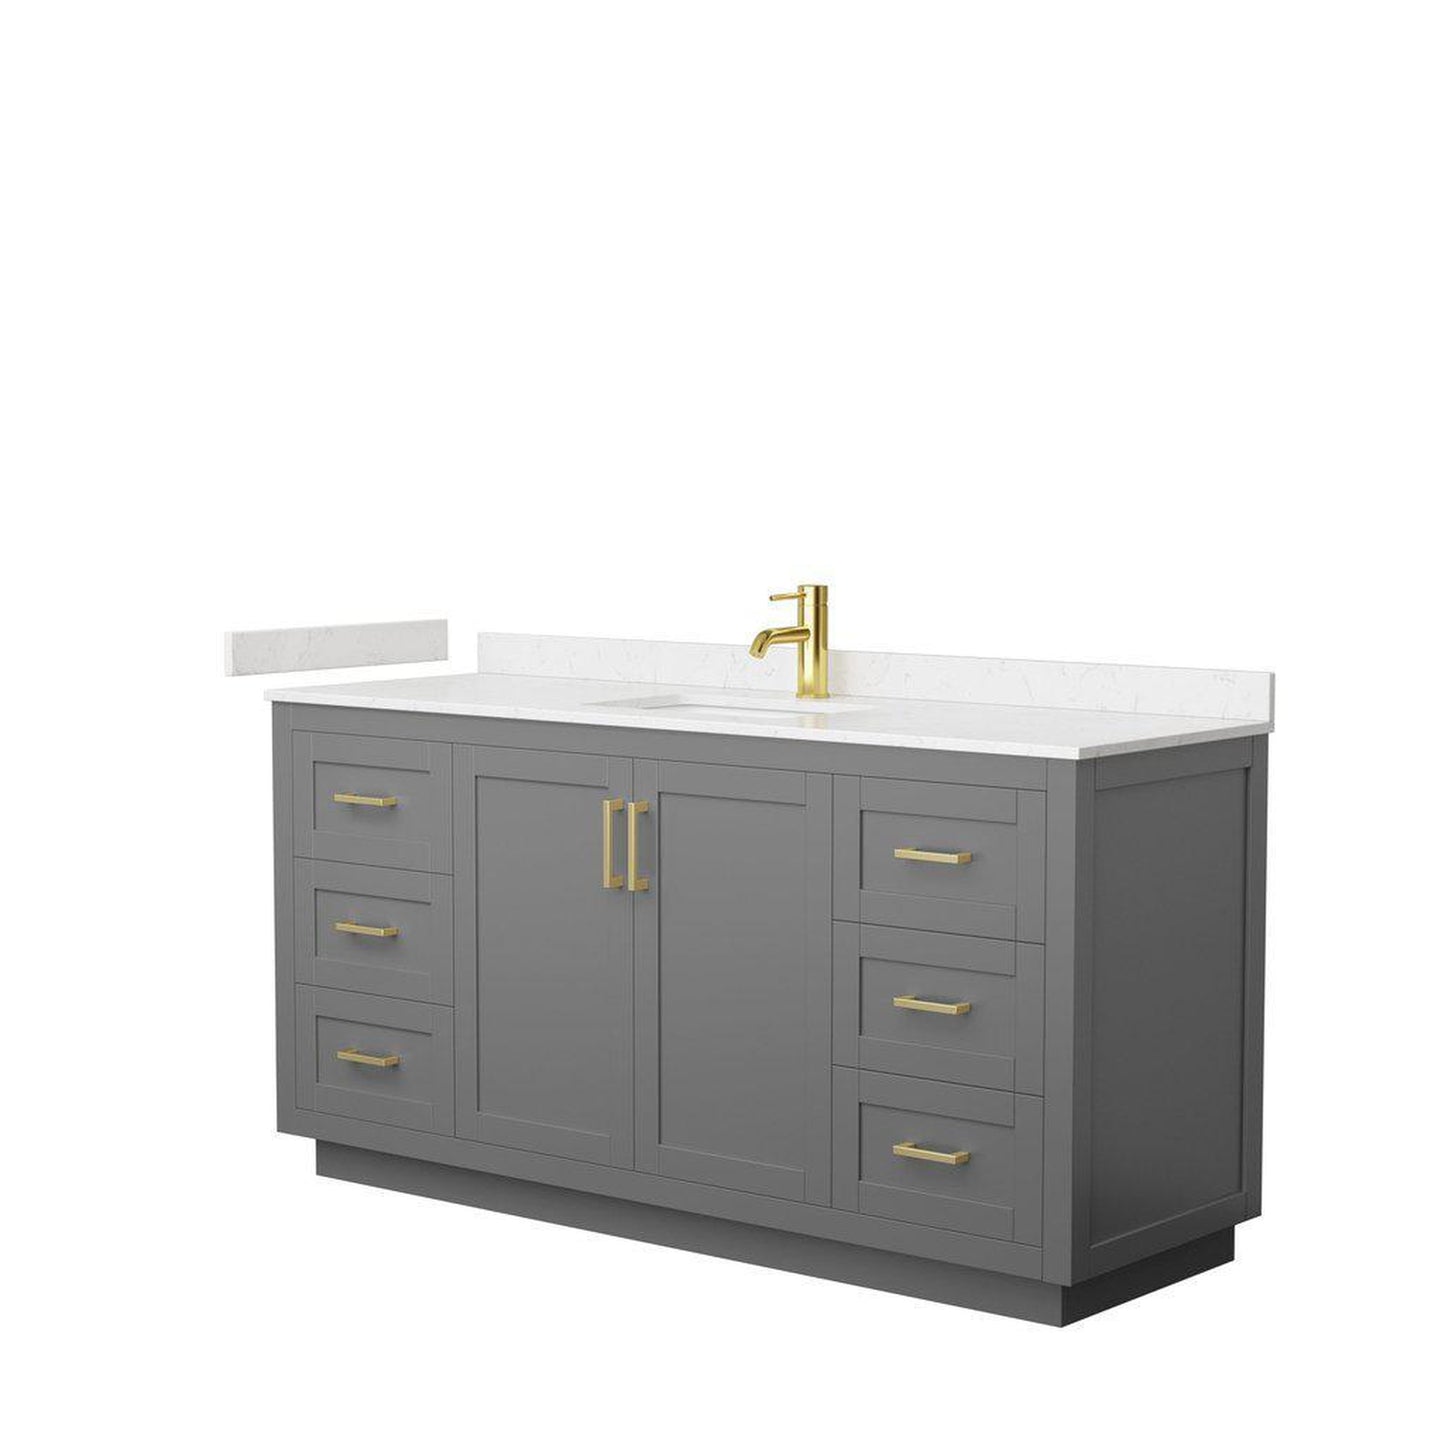 Wyndham Collection Miranda 66" Single Bathroom Dark Gray Vanity Set With Light-Vein Carrara Cultured Marble Countertop, Undermount Square Sink, And Brushed Gold Trim